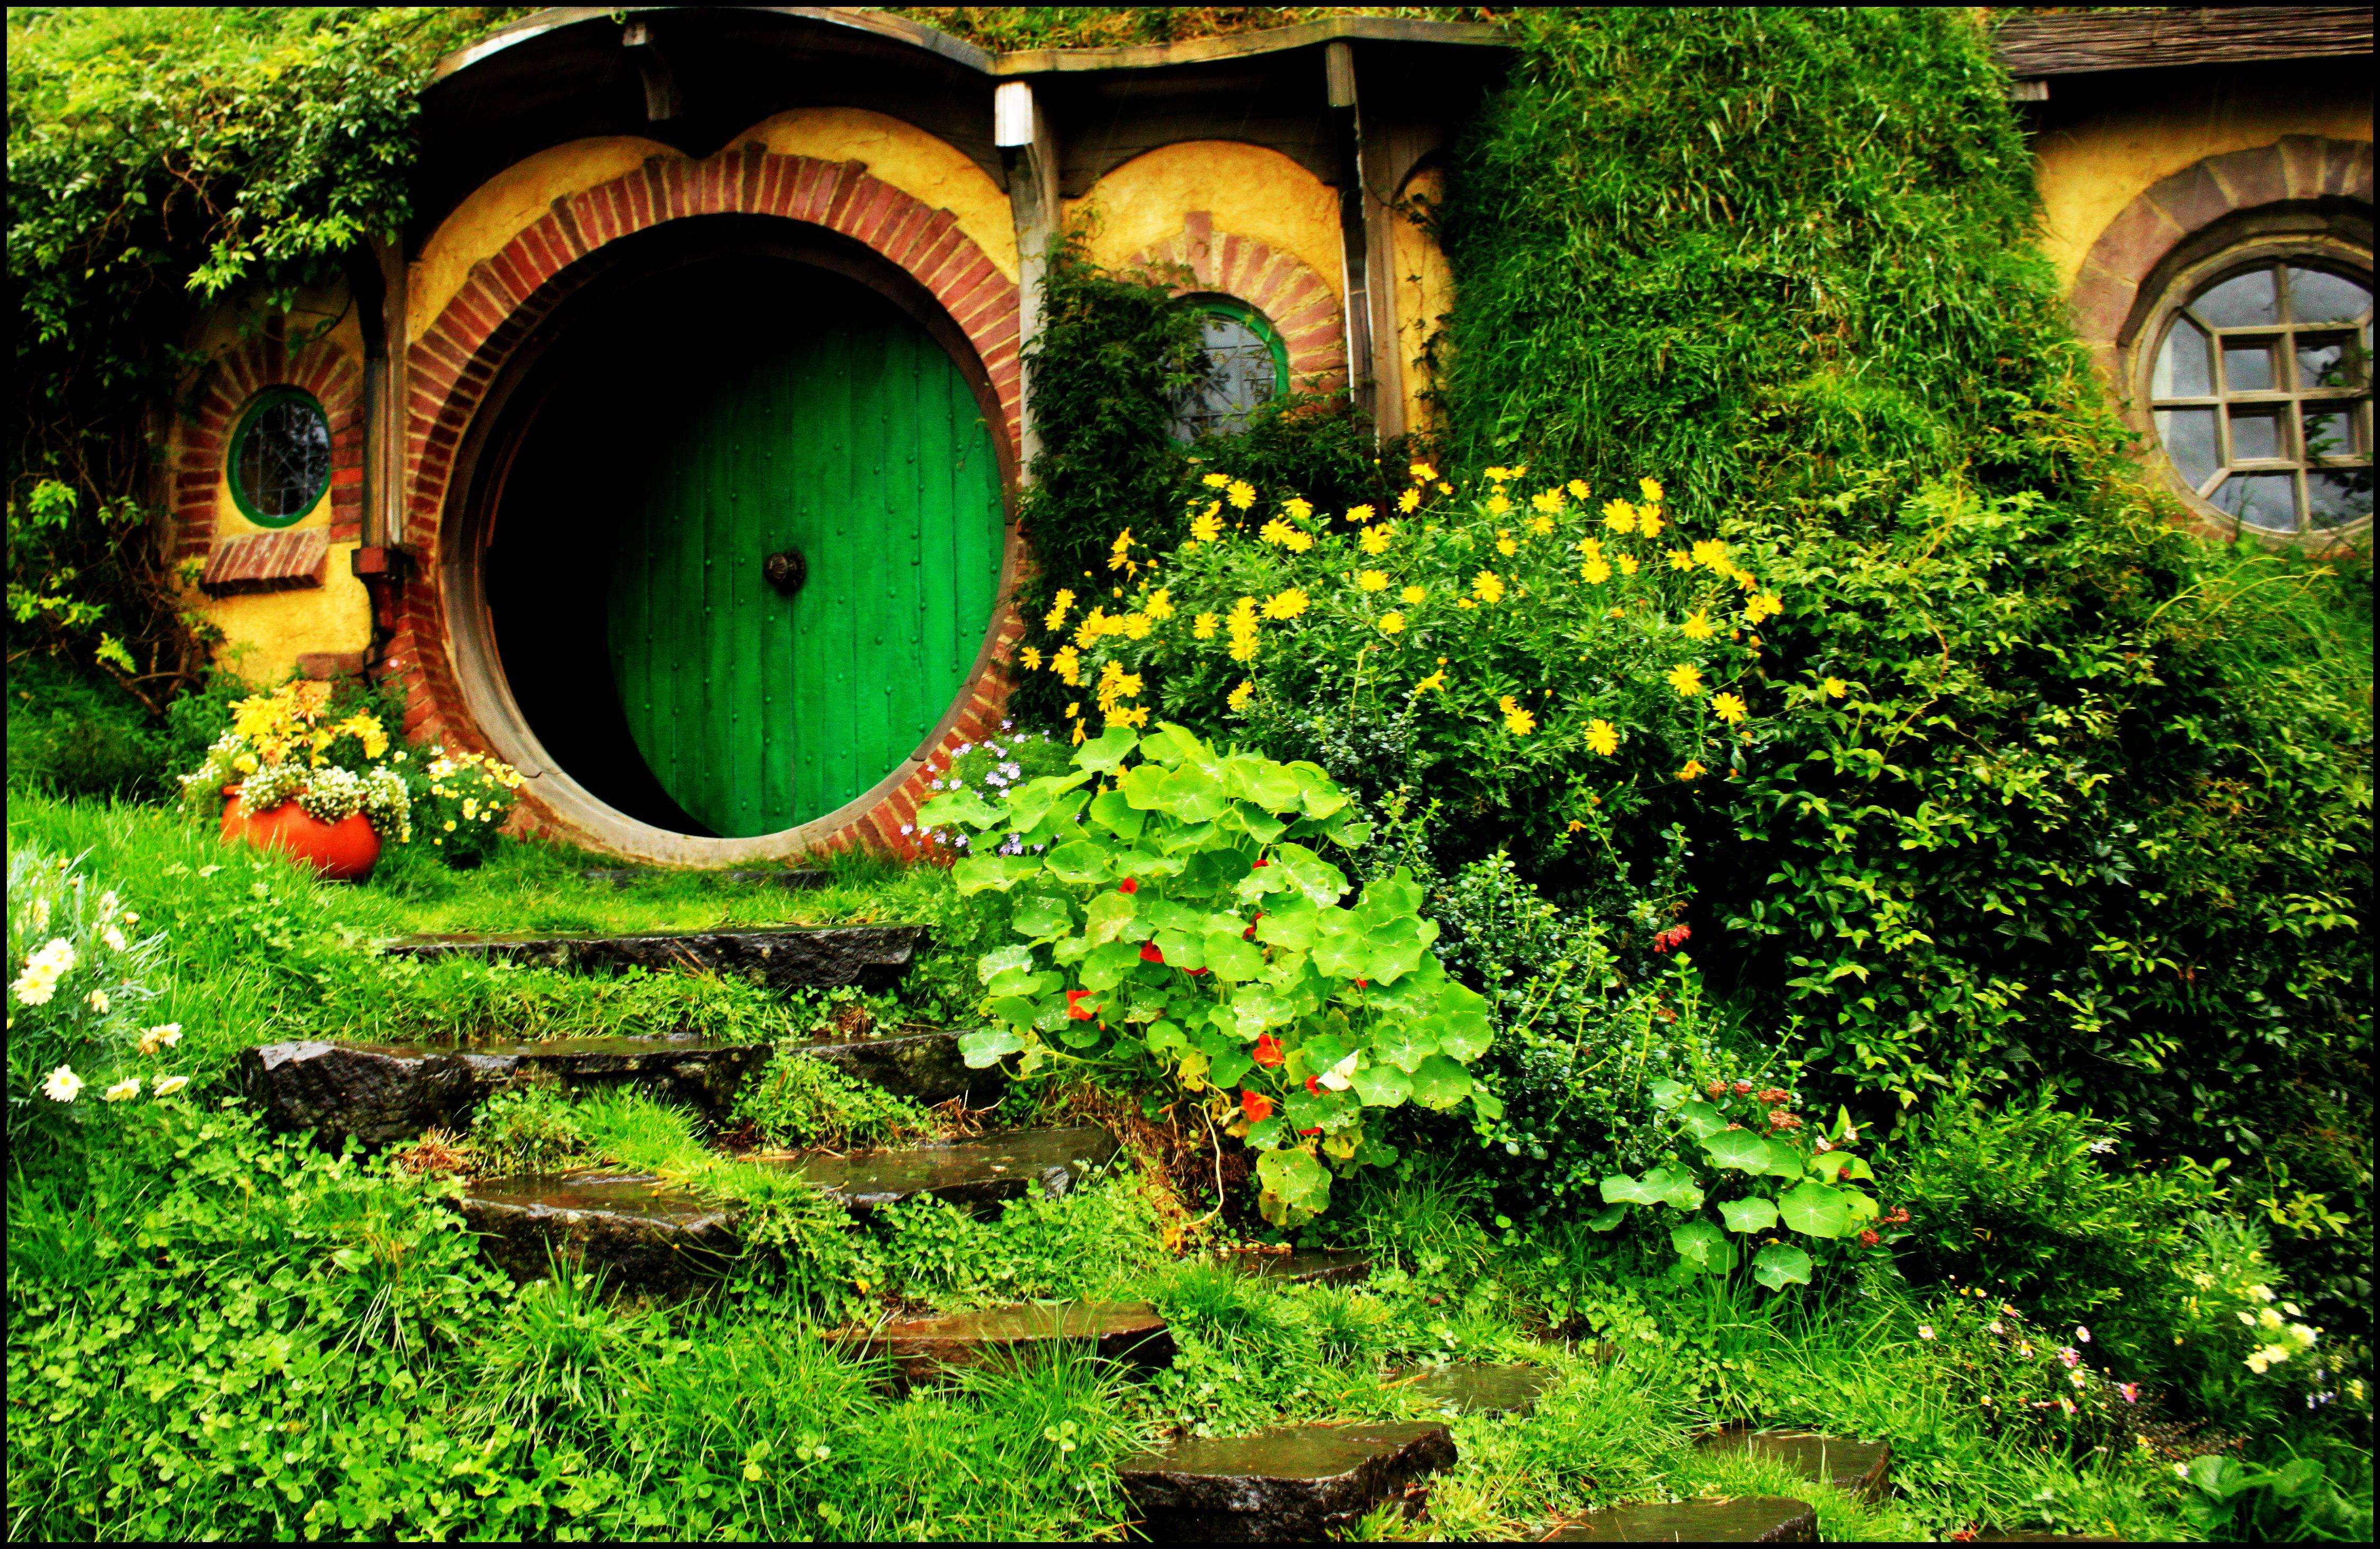 Hobbit Shire iPhone Wallpapers Free Download